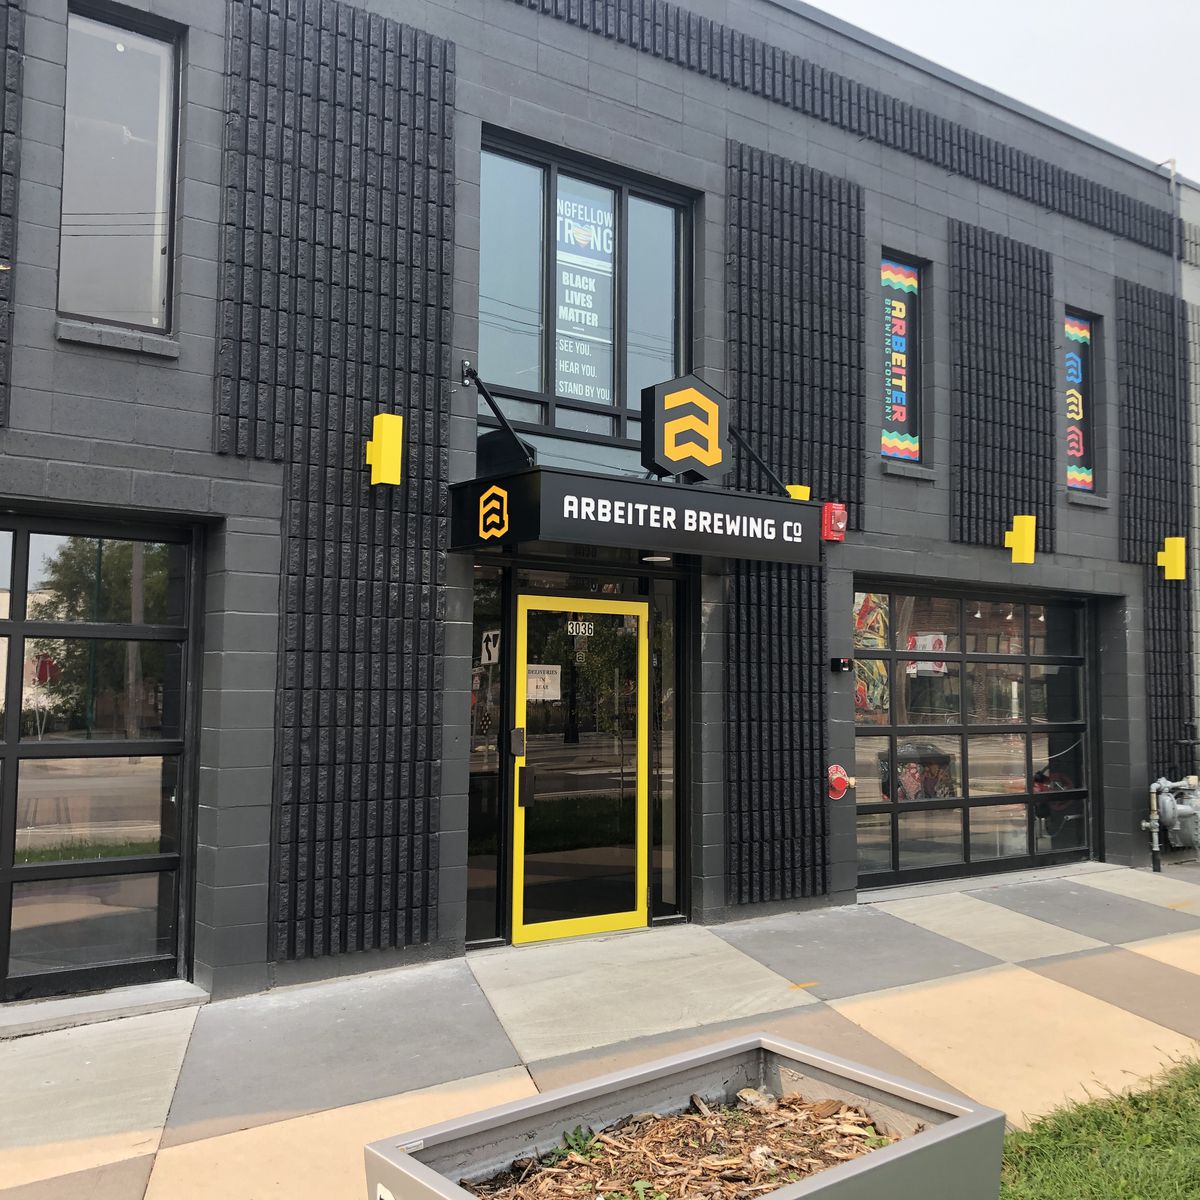 The black painted concrete walls are offset by bright yellow signage for the brewery. There are large windows facing the street.